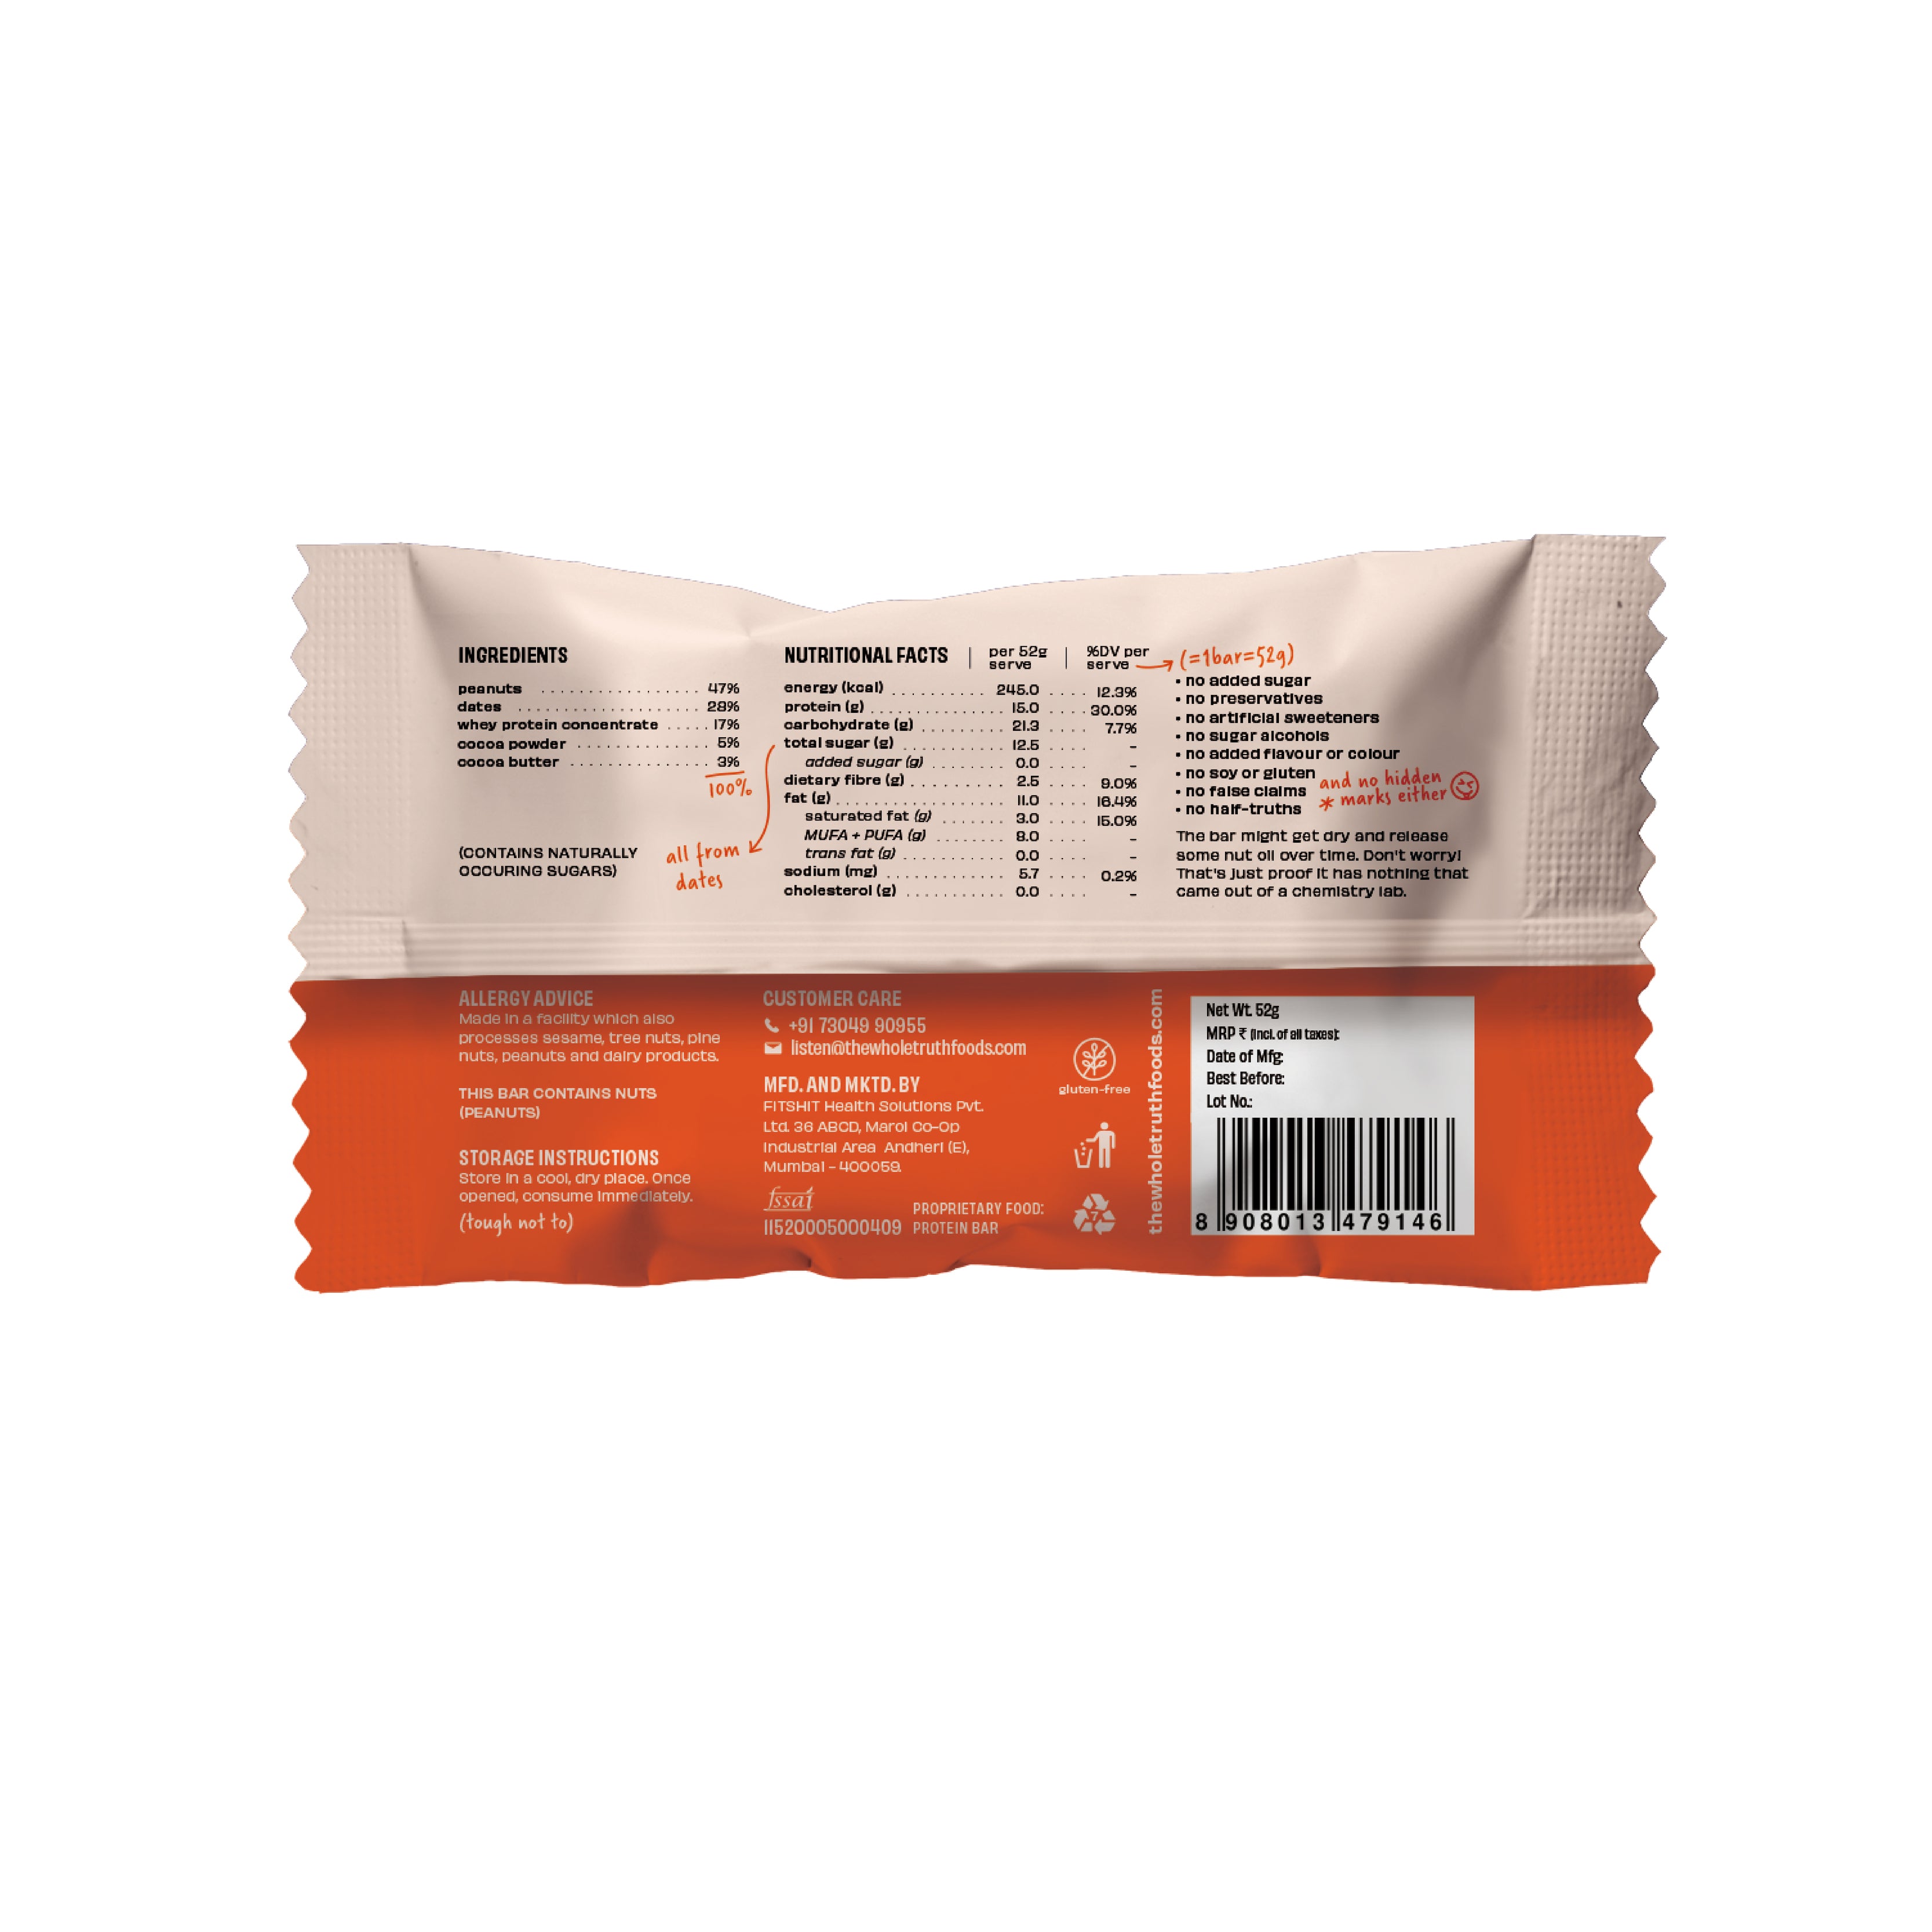 The Whole Truth - Protein Bars - Peanut Cocoa - Pack of 6 (6 x 52g) - No Added Sugar - All Natural